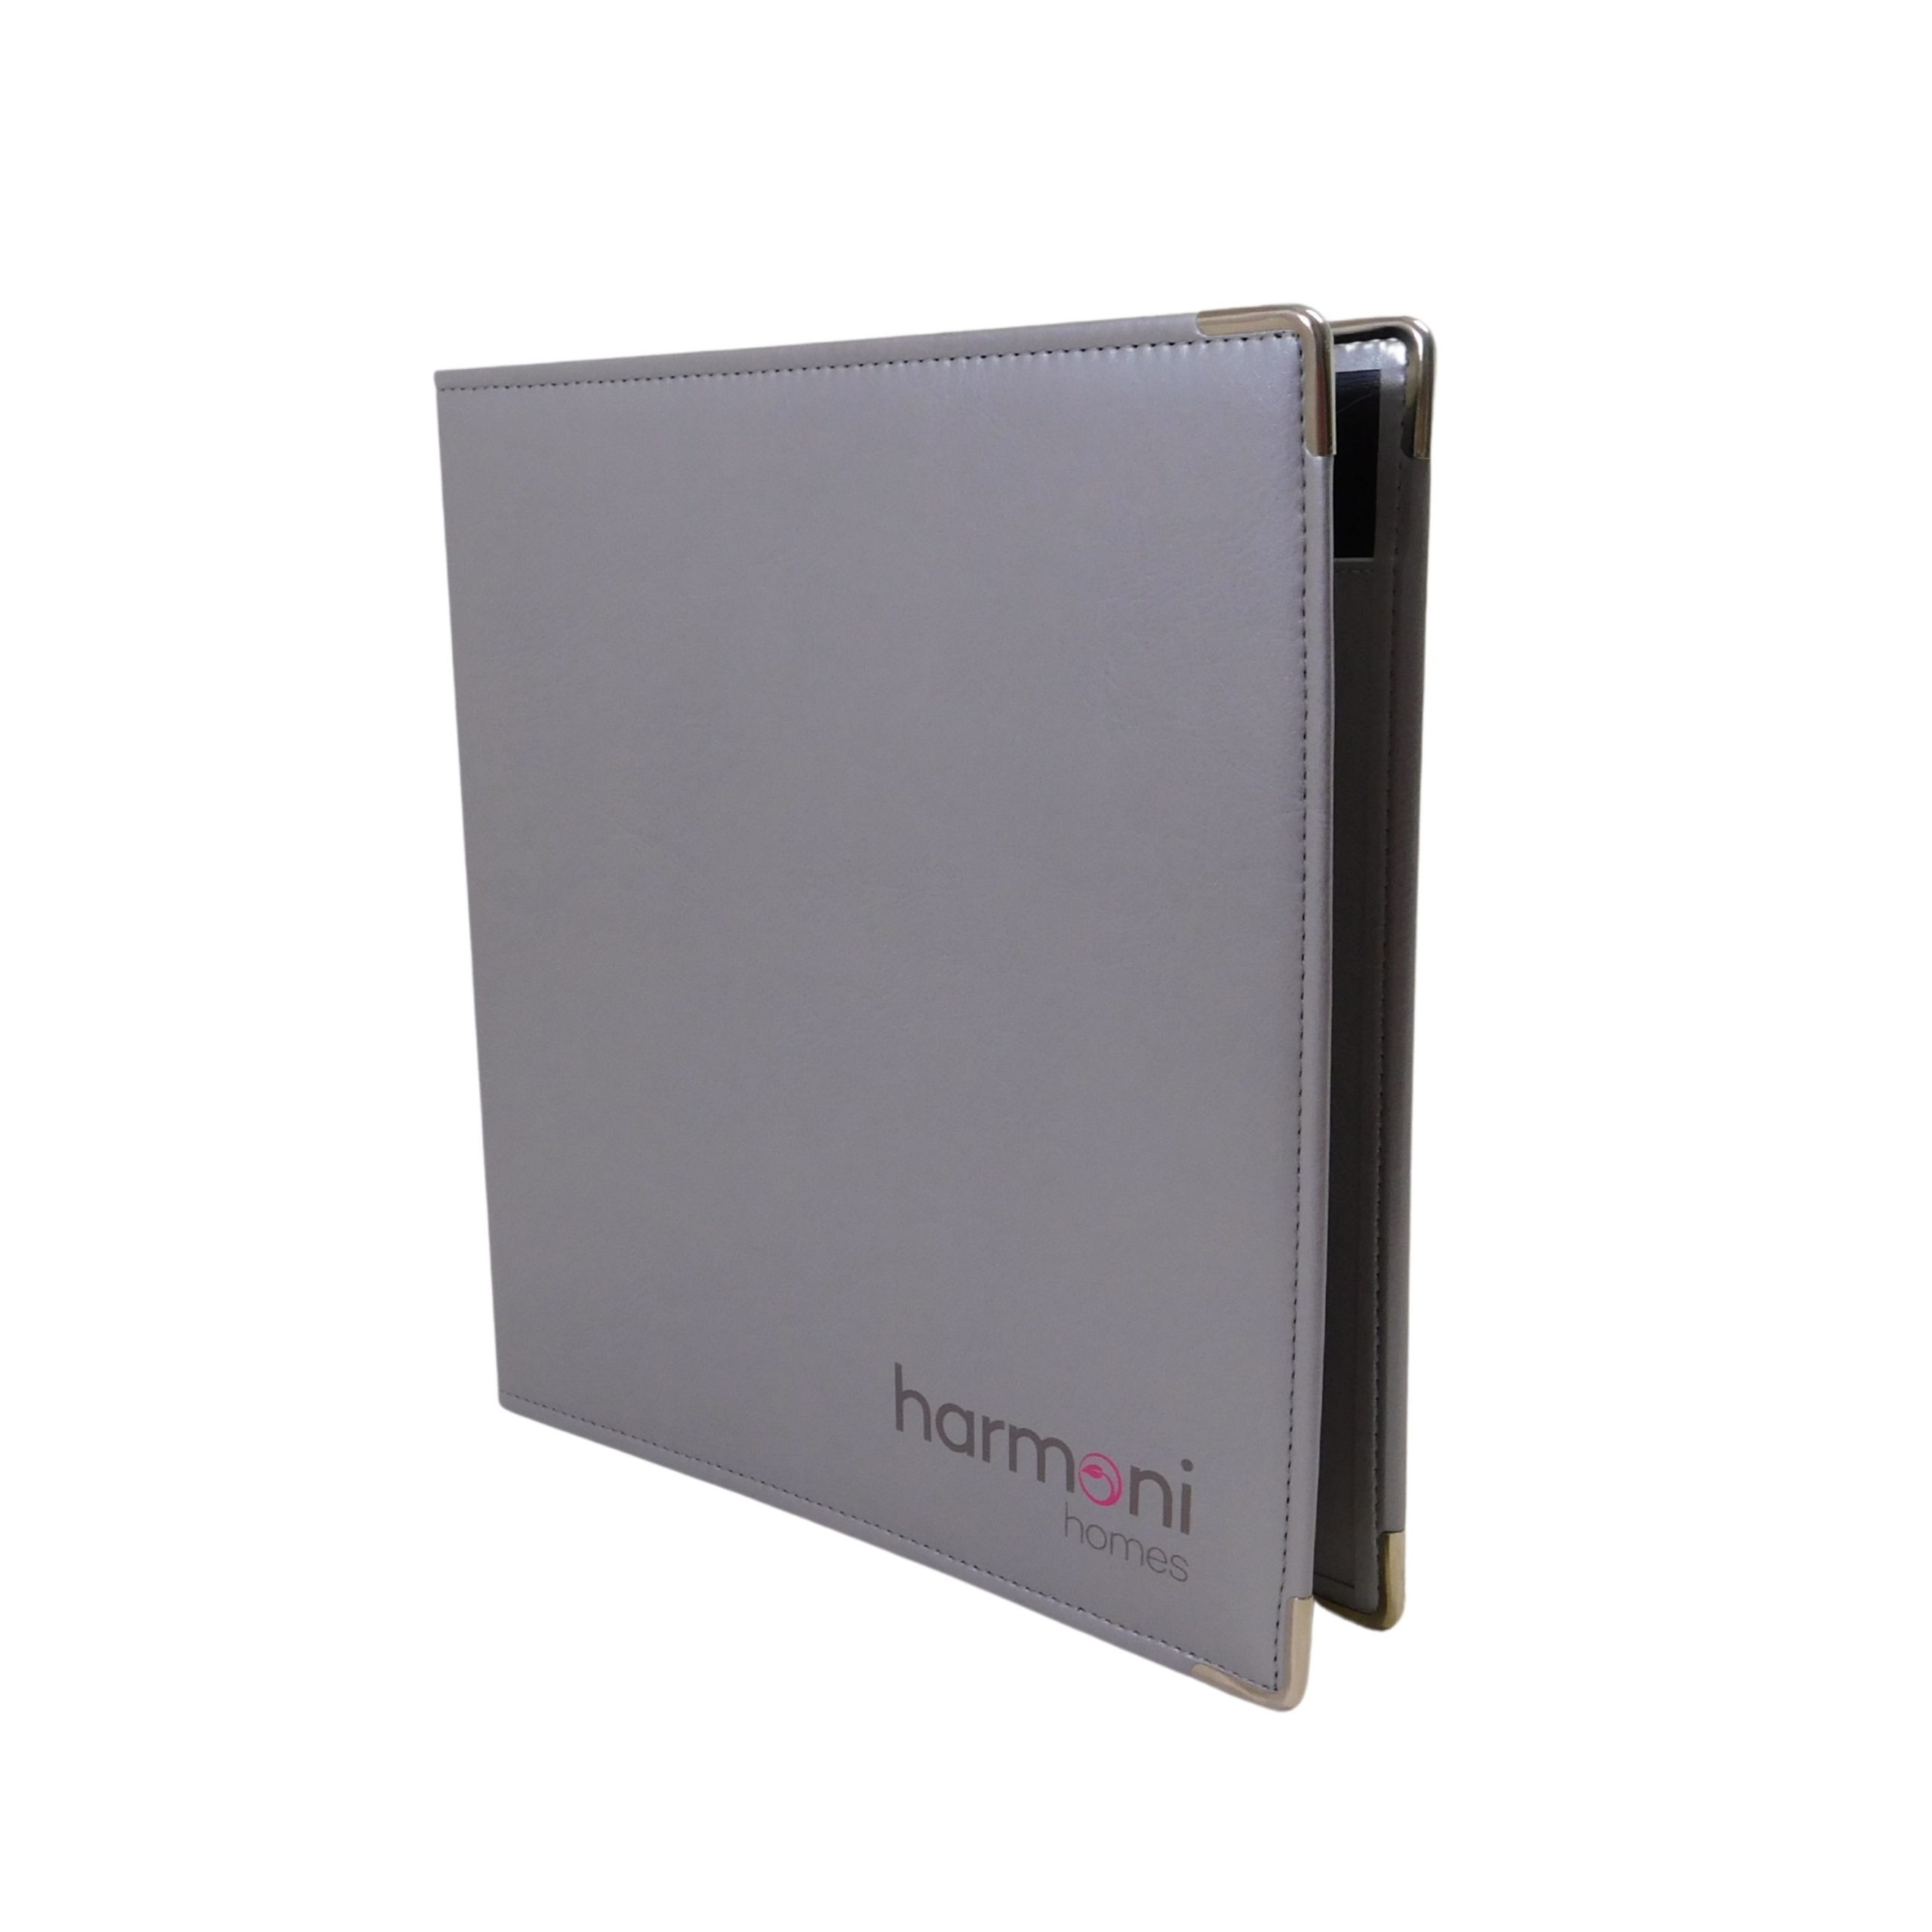 A4 PU Leather Look Padded Ring Binders - The Binder Network